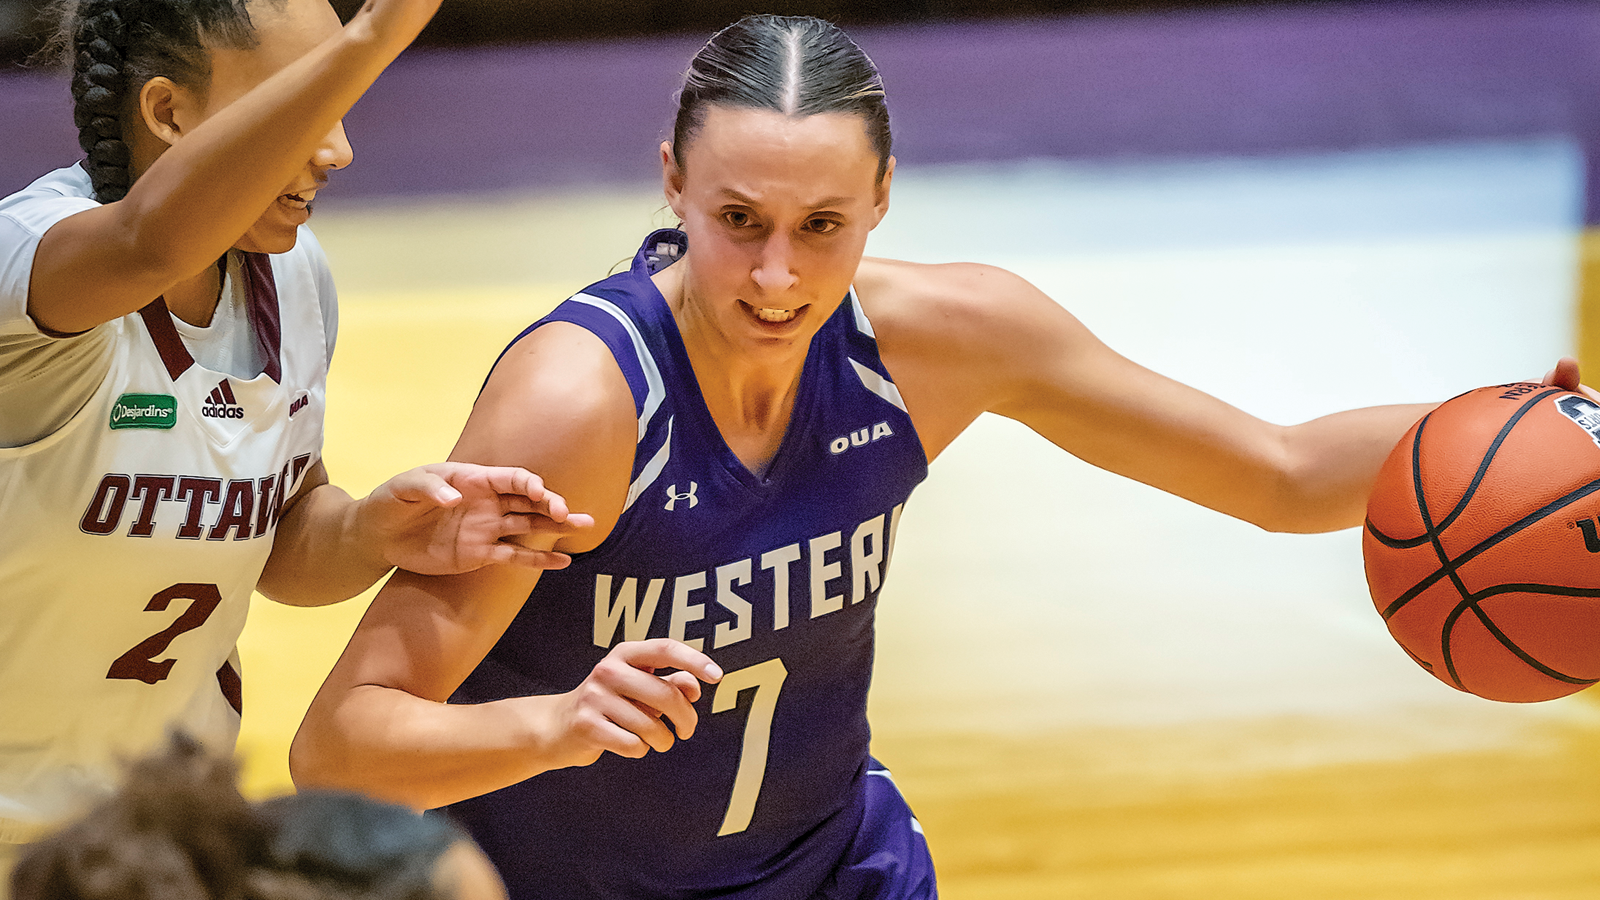 Western women's basketball player MacKeely Shantz dribbling the ball with an opposing defender in front of her